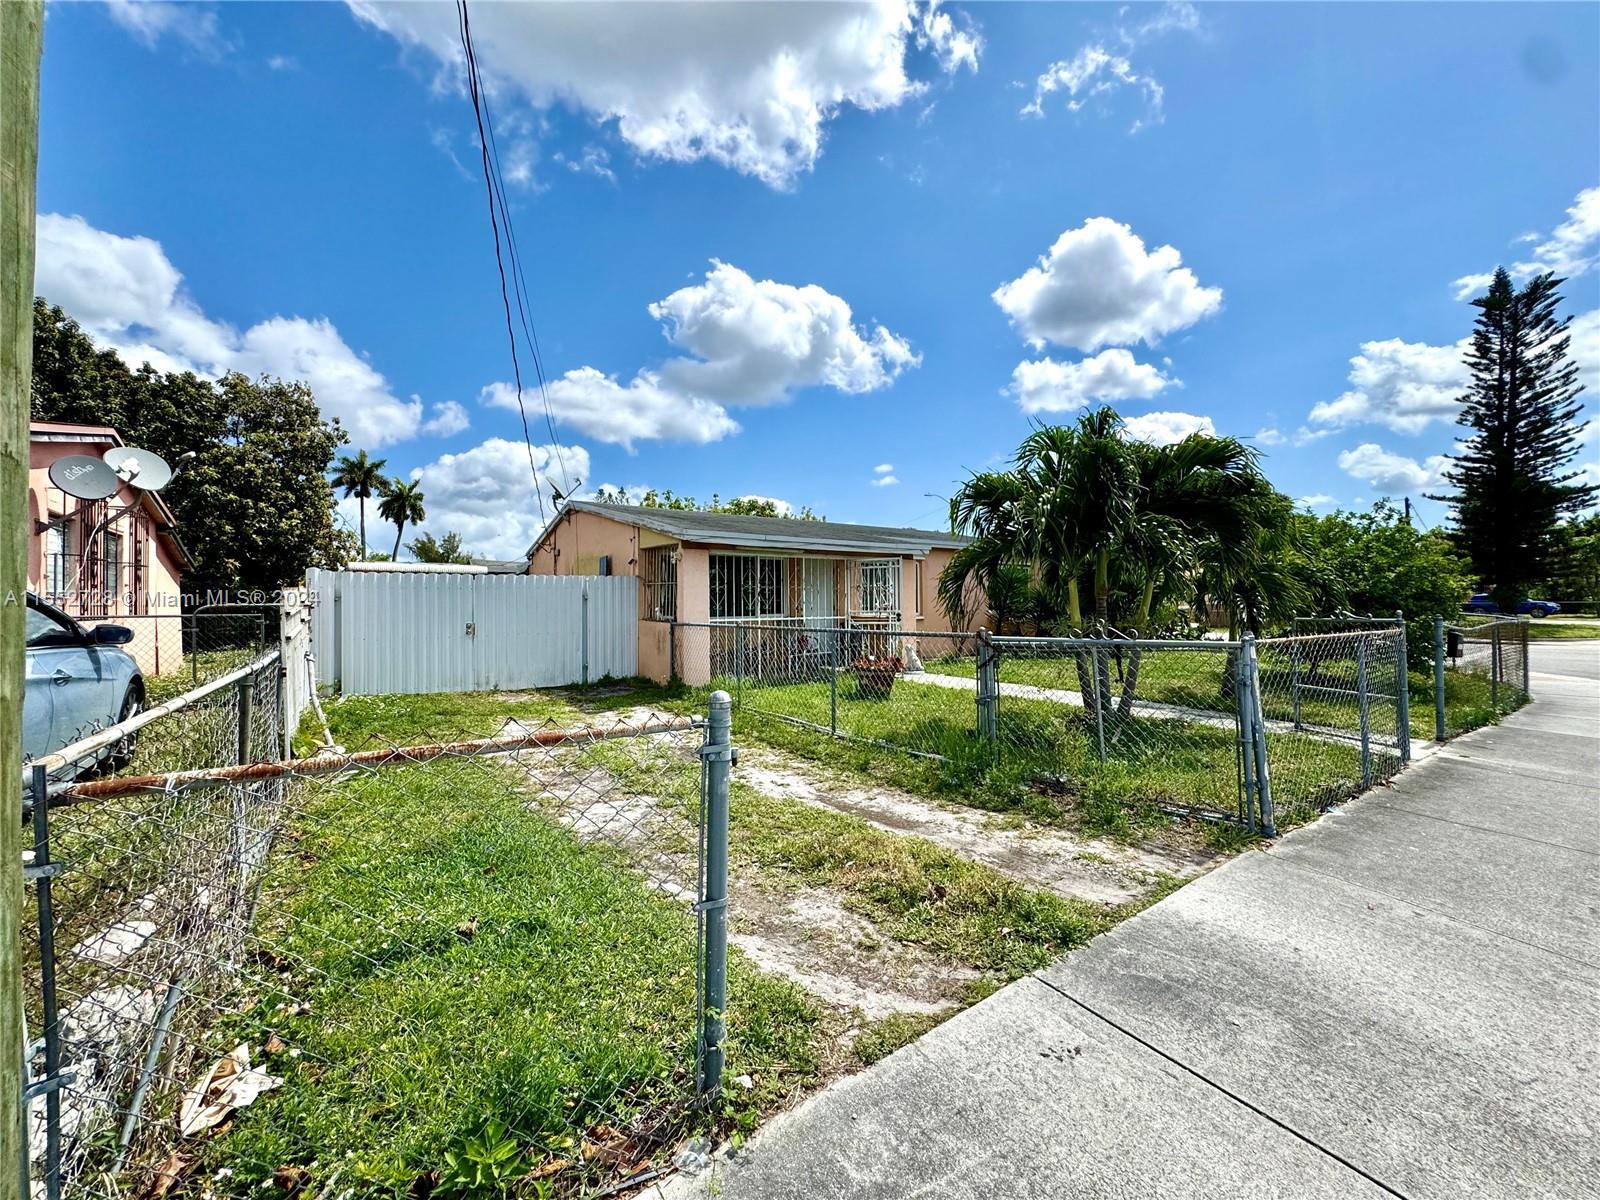 Photo of 13431 NW 32nd Ave in Opa-Locka, FL